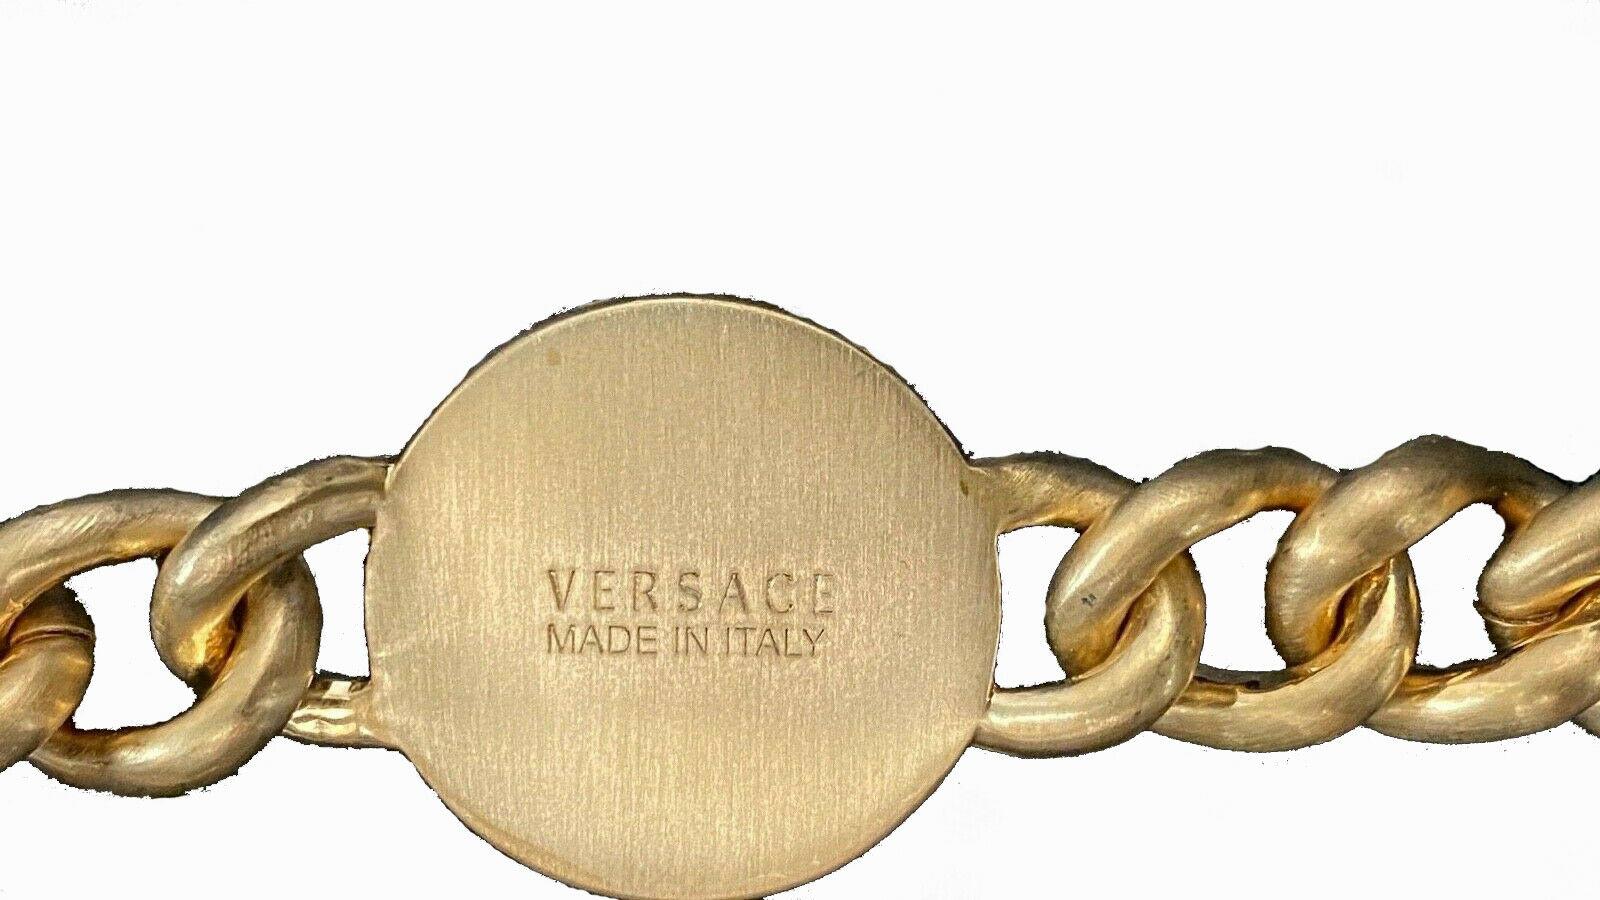 New VERSACE 24K GOLD PLATED 5 MEDUSA PENDANT CHAIN NECKLACE 2